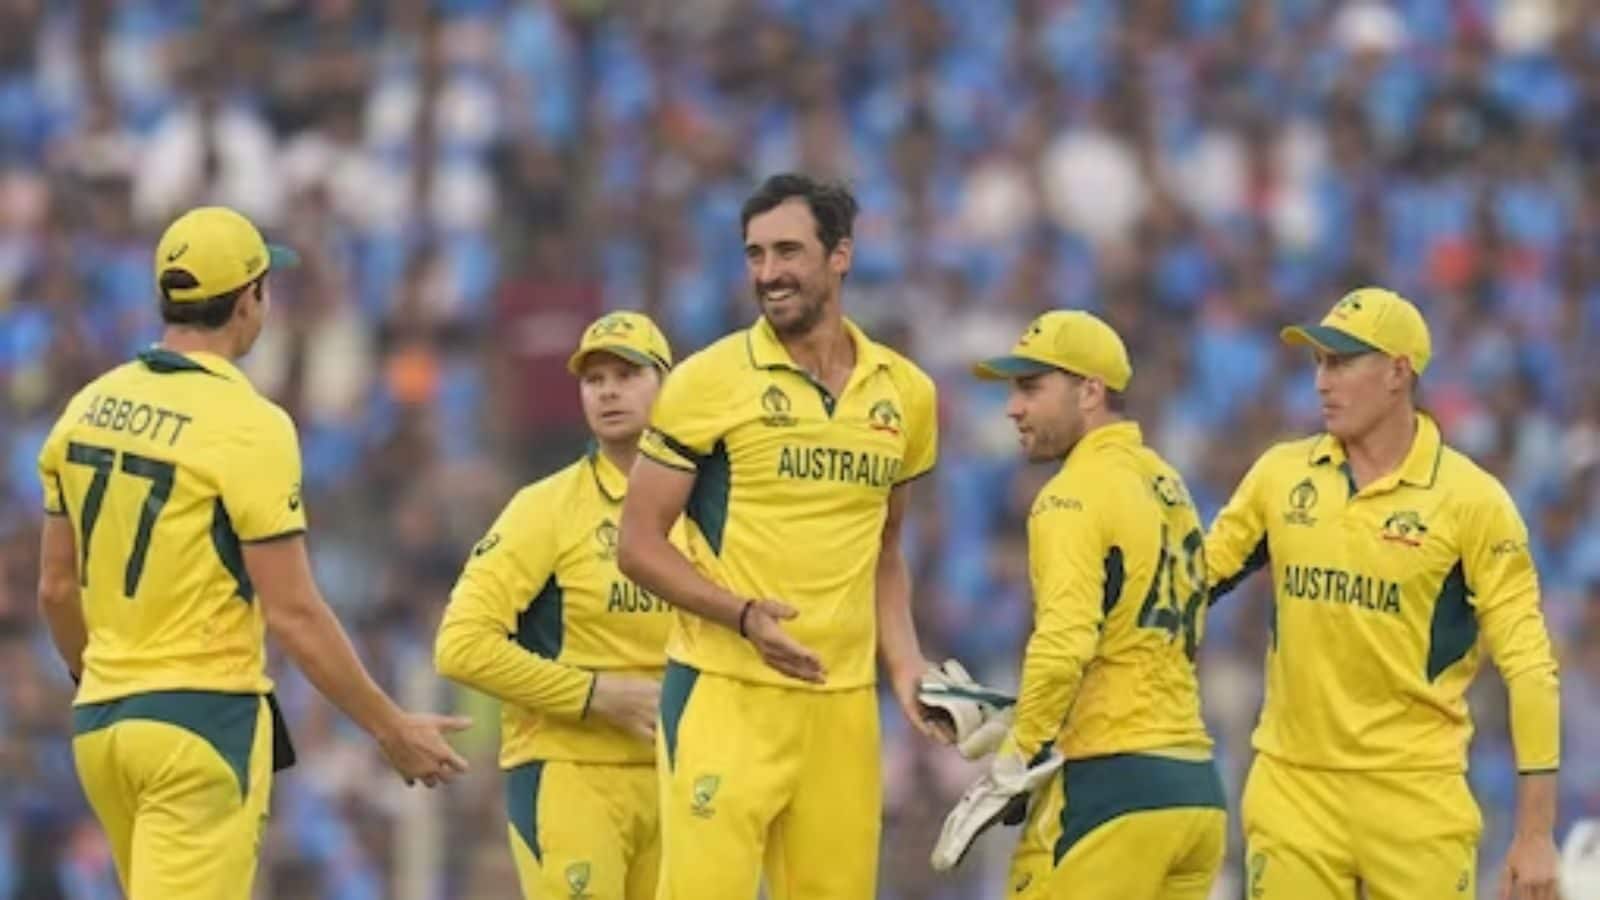 India vs. Australia World Cup Final Exciting Match Recap and Analysis